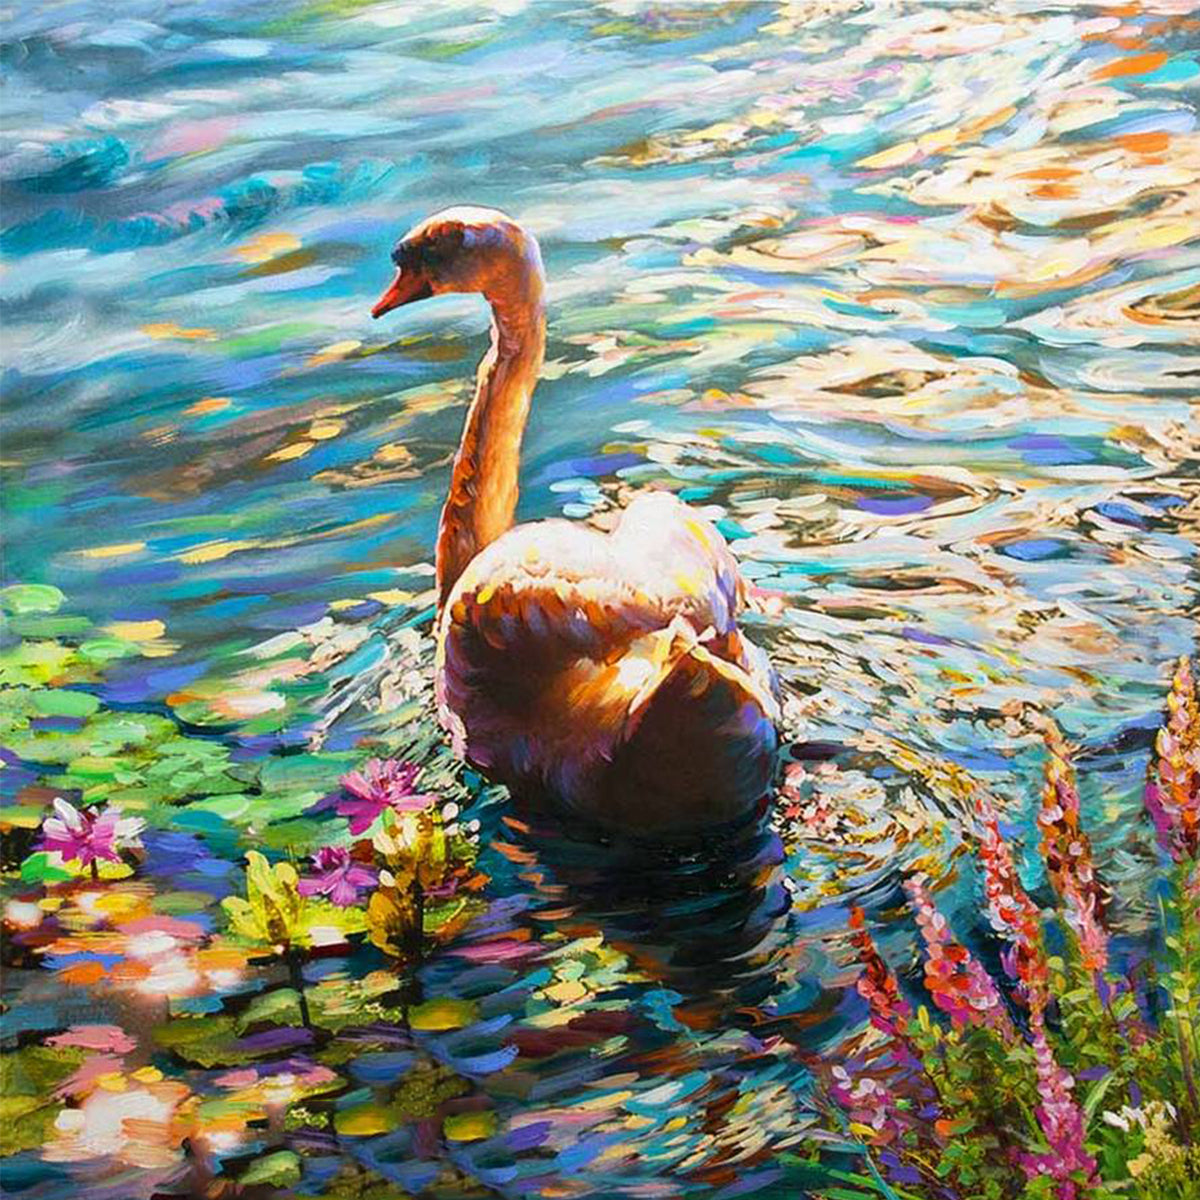 Best Deal for 5D Diamond Art Painting Kits for Adults DIY Wild Duck Full